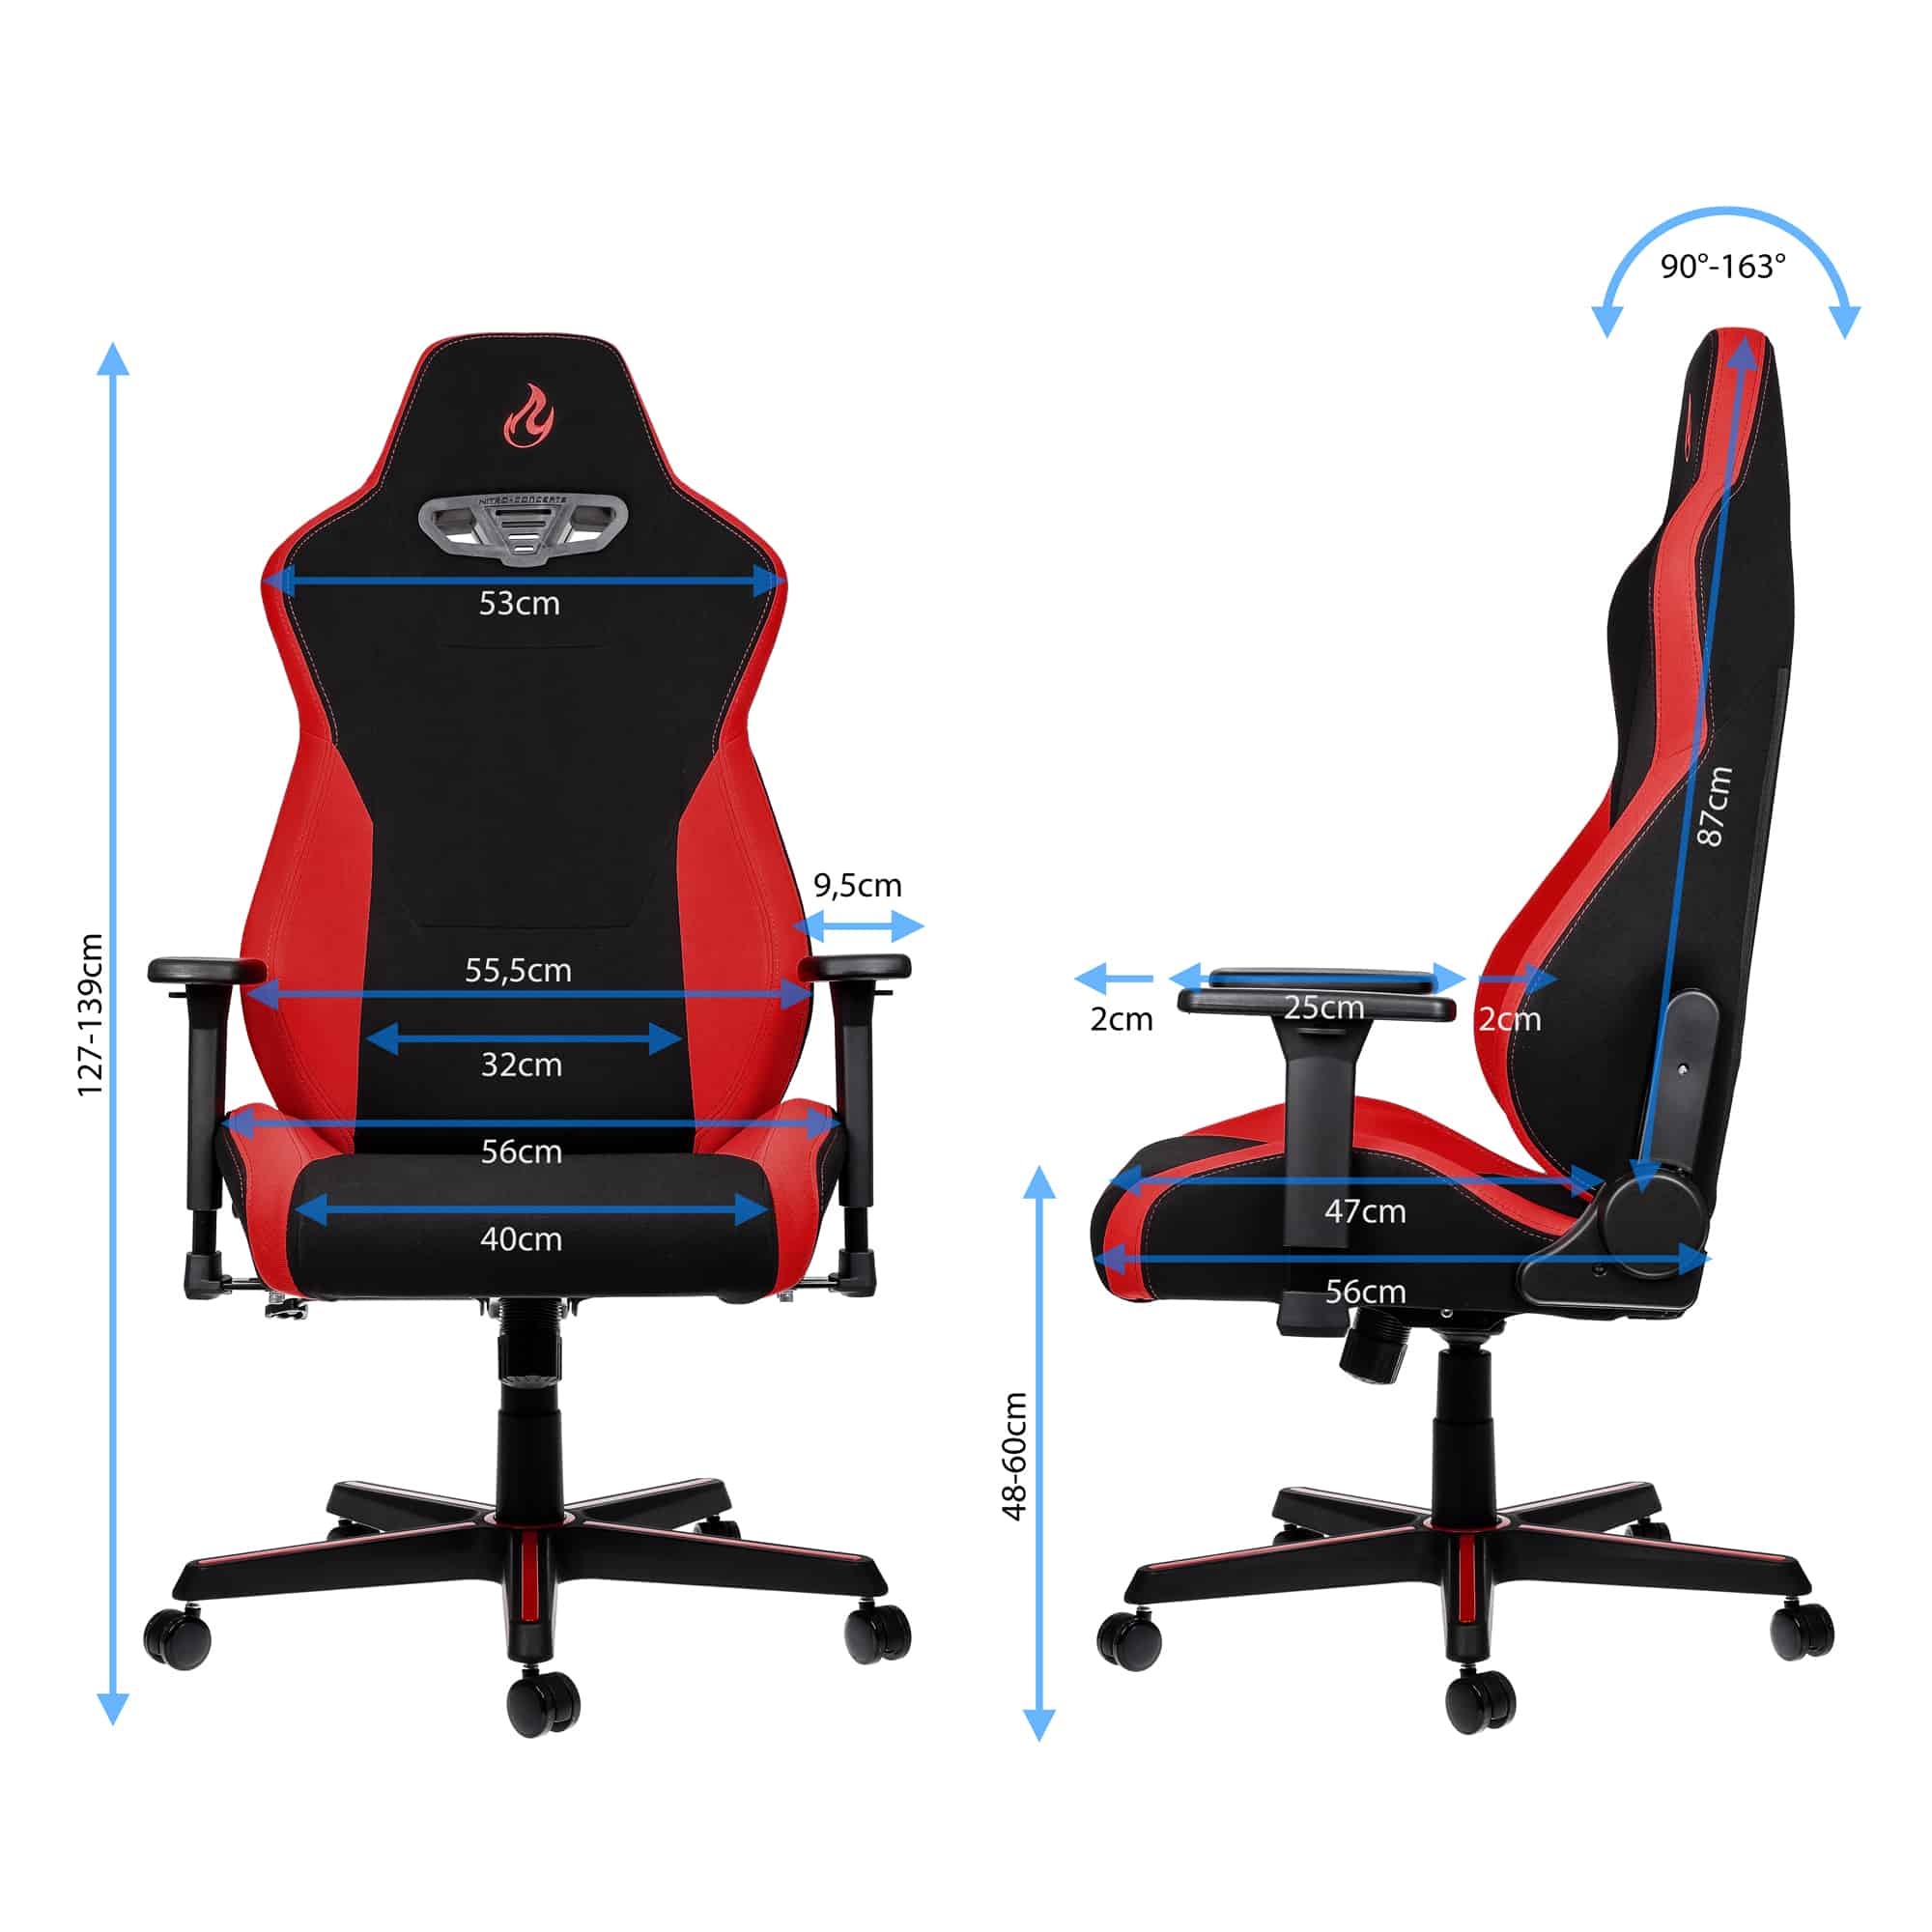 Nitro Concepts S300 Series Gaming Chair Black/Red